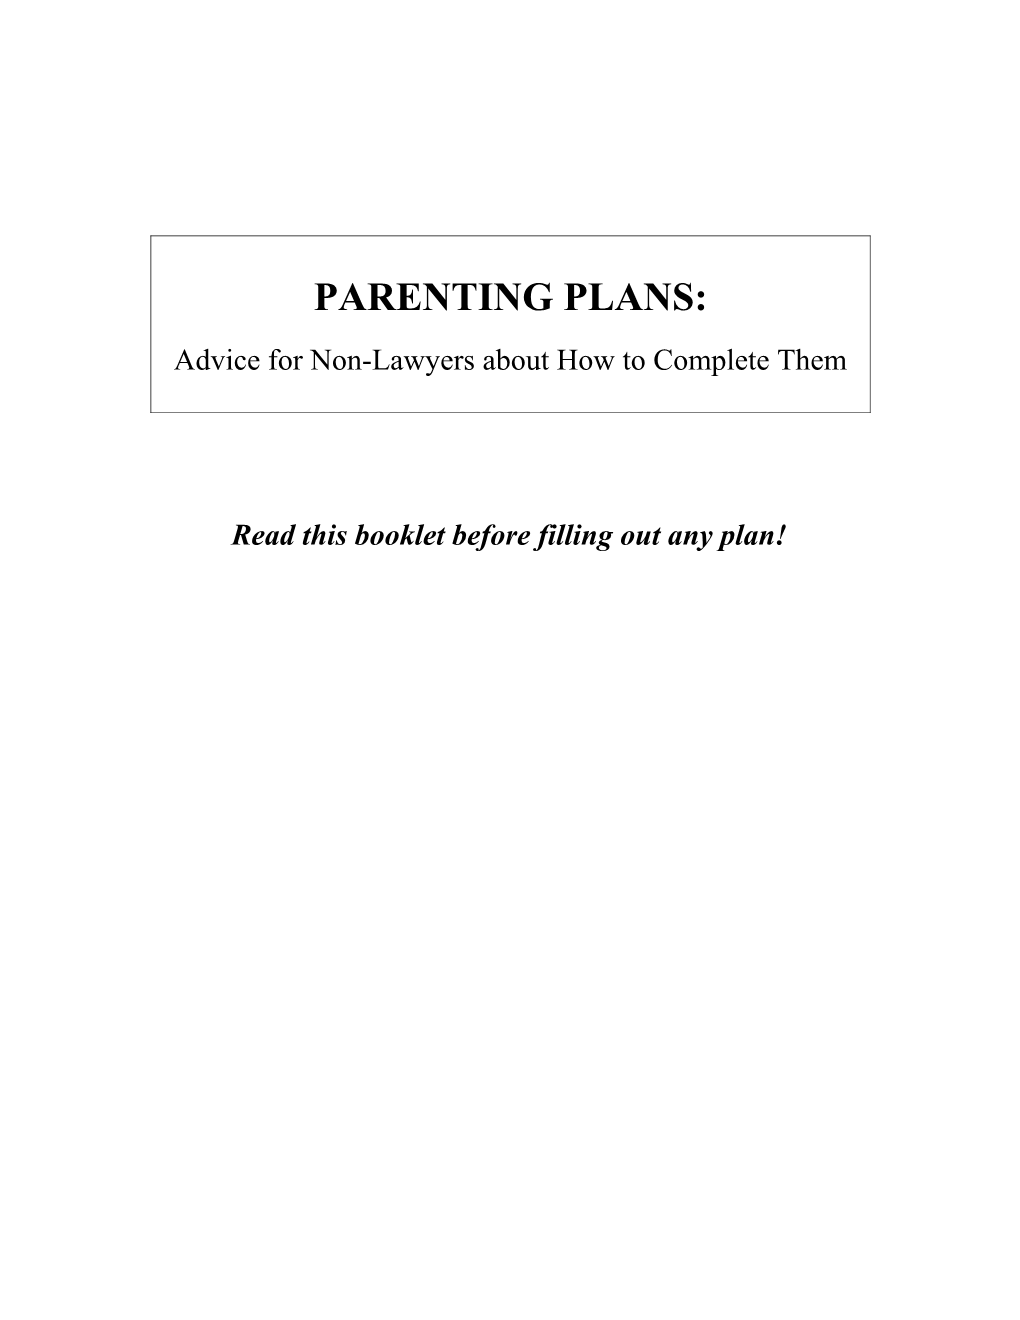 Read This Booklet Before Filling out Any Plan!